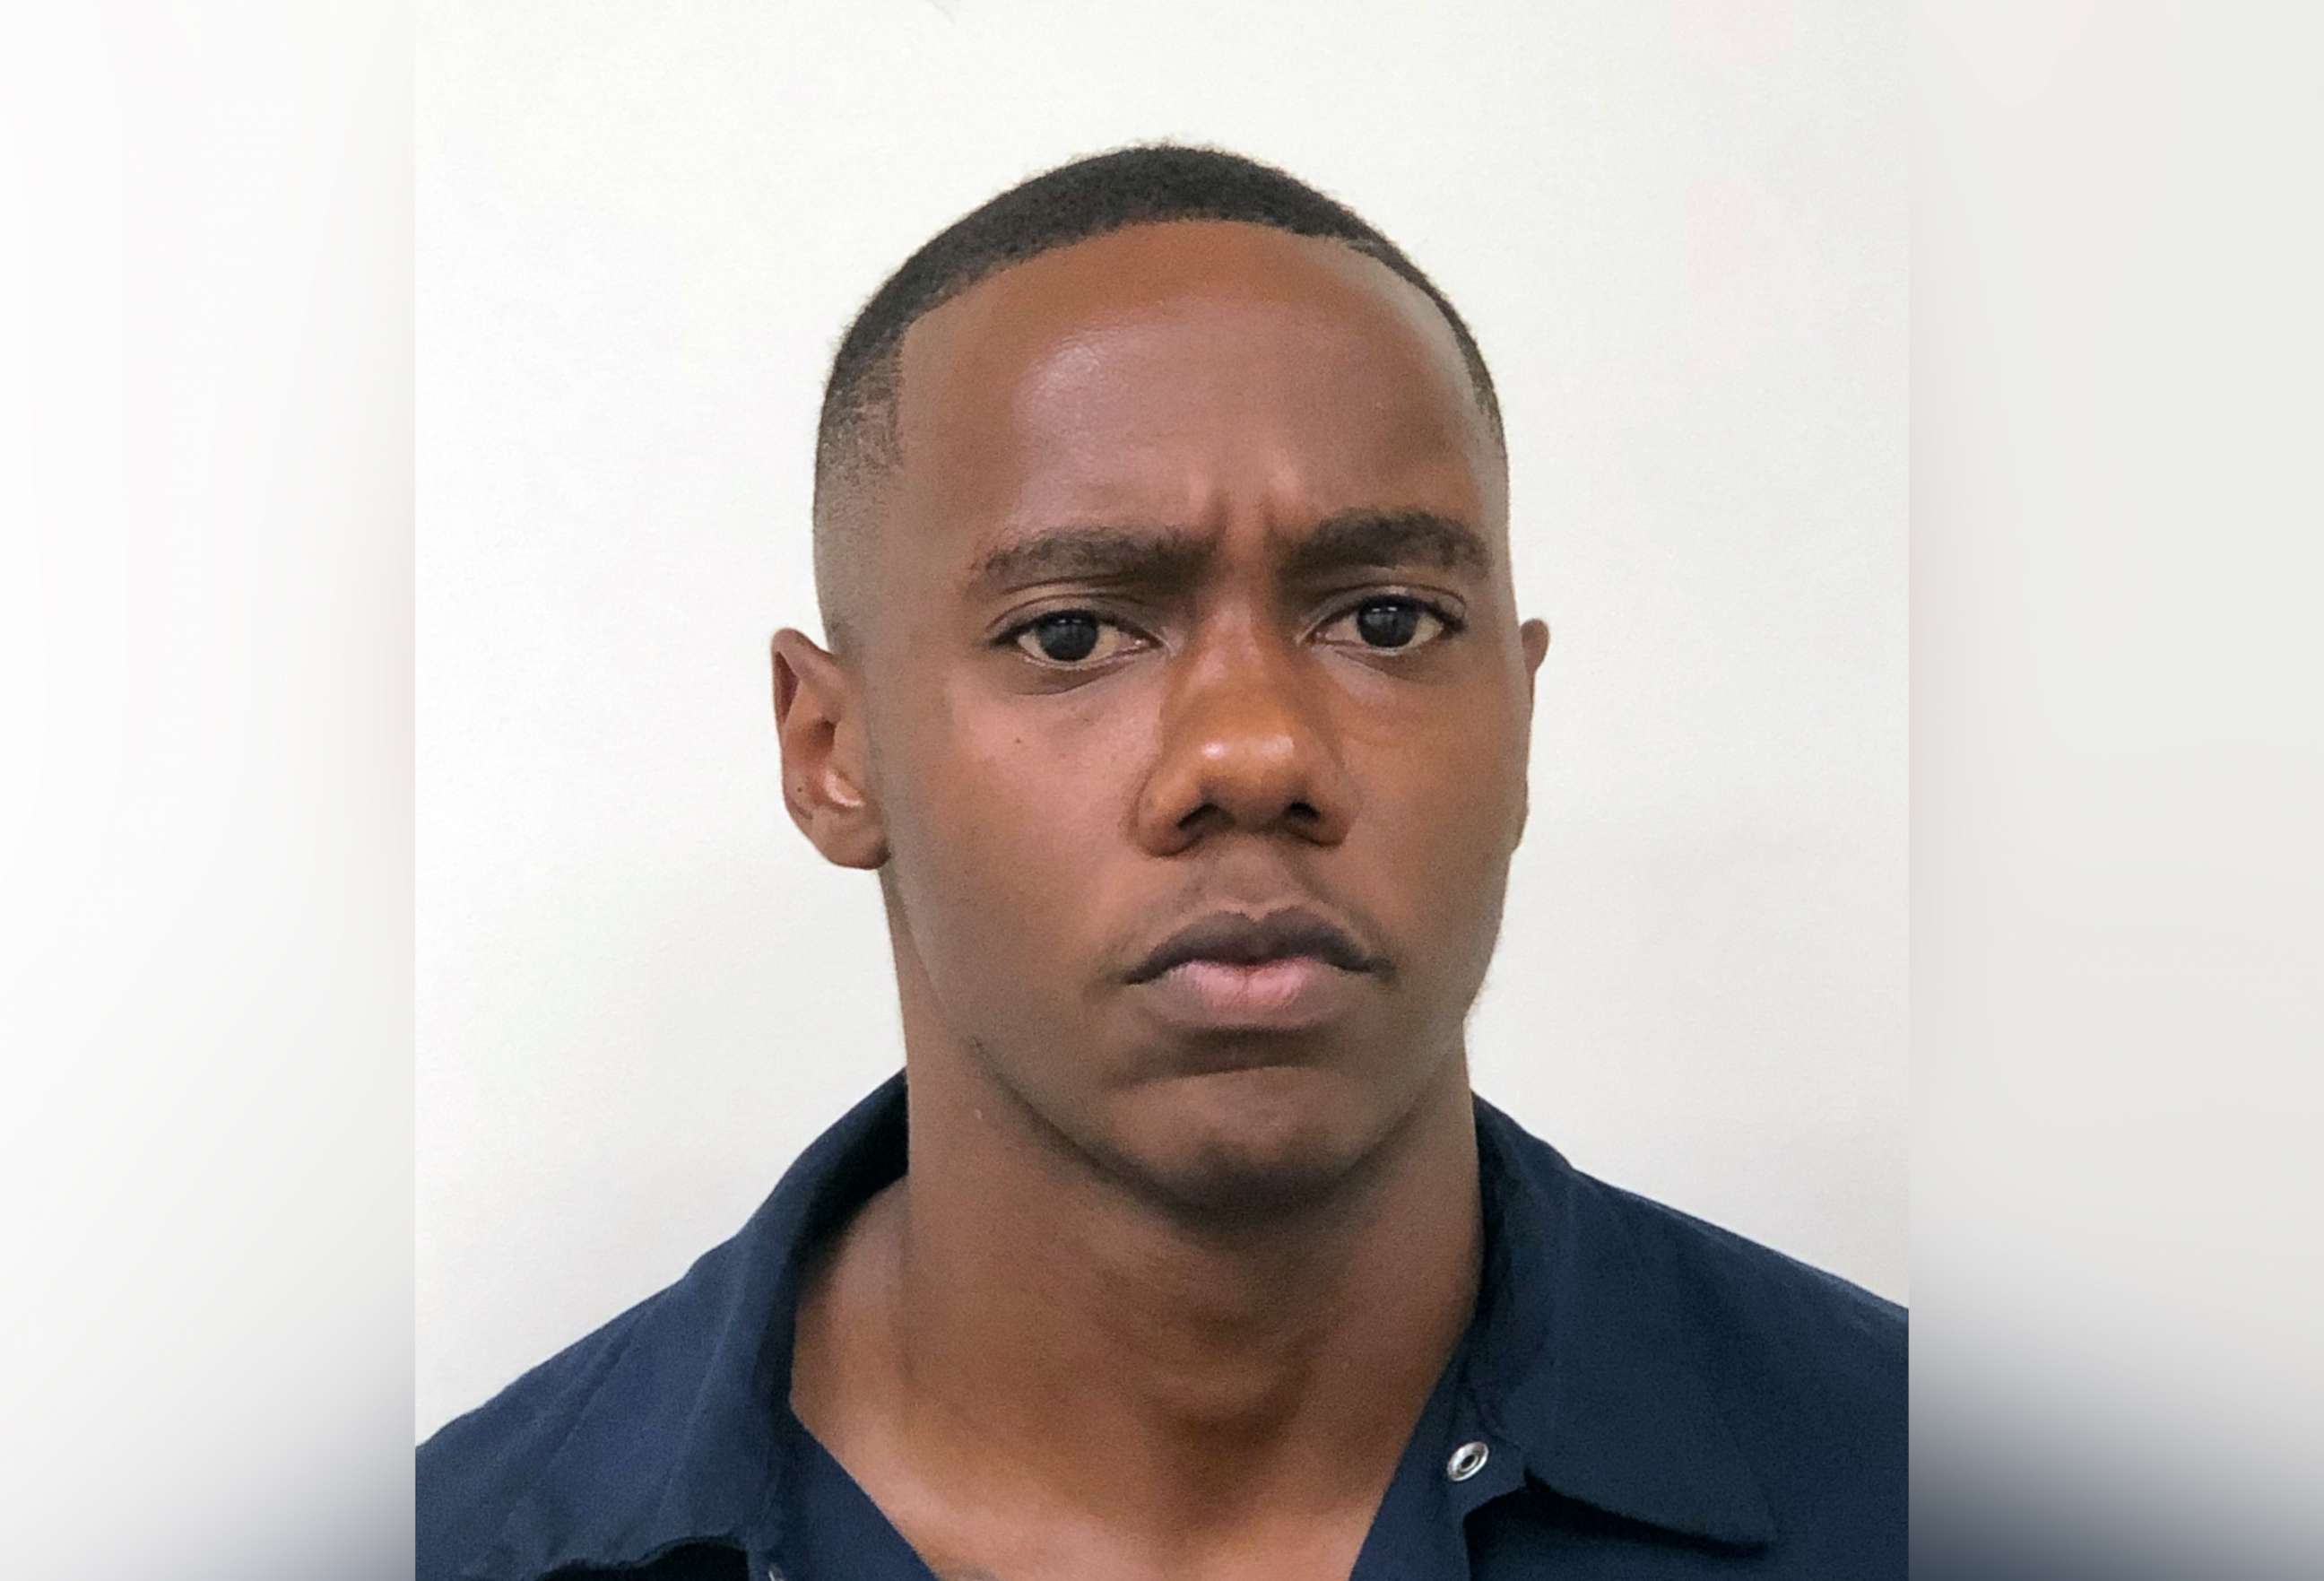 PHOTO: Kenneth Thomas Bowen III, 24, is pictured in an undated booking photo released by police in Clayton County, Ga., on Aug. 27, 2019.